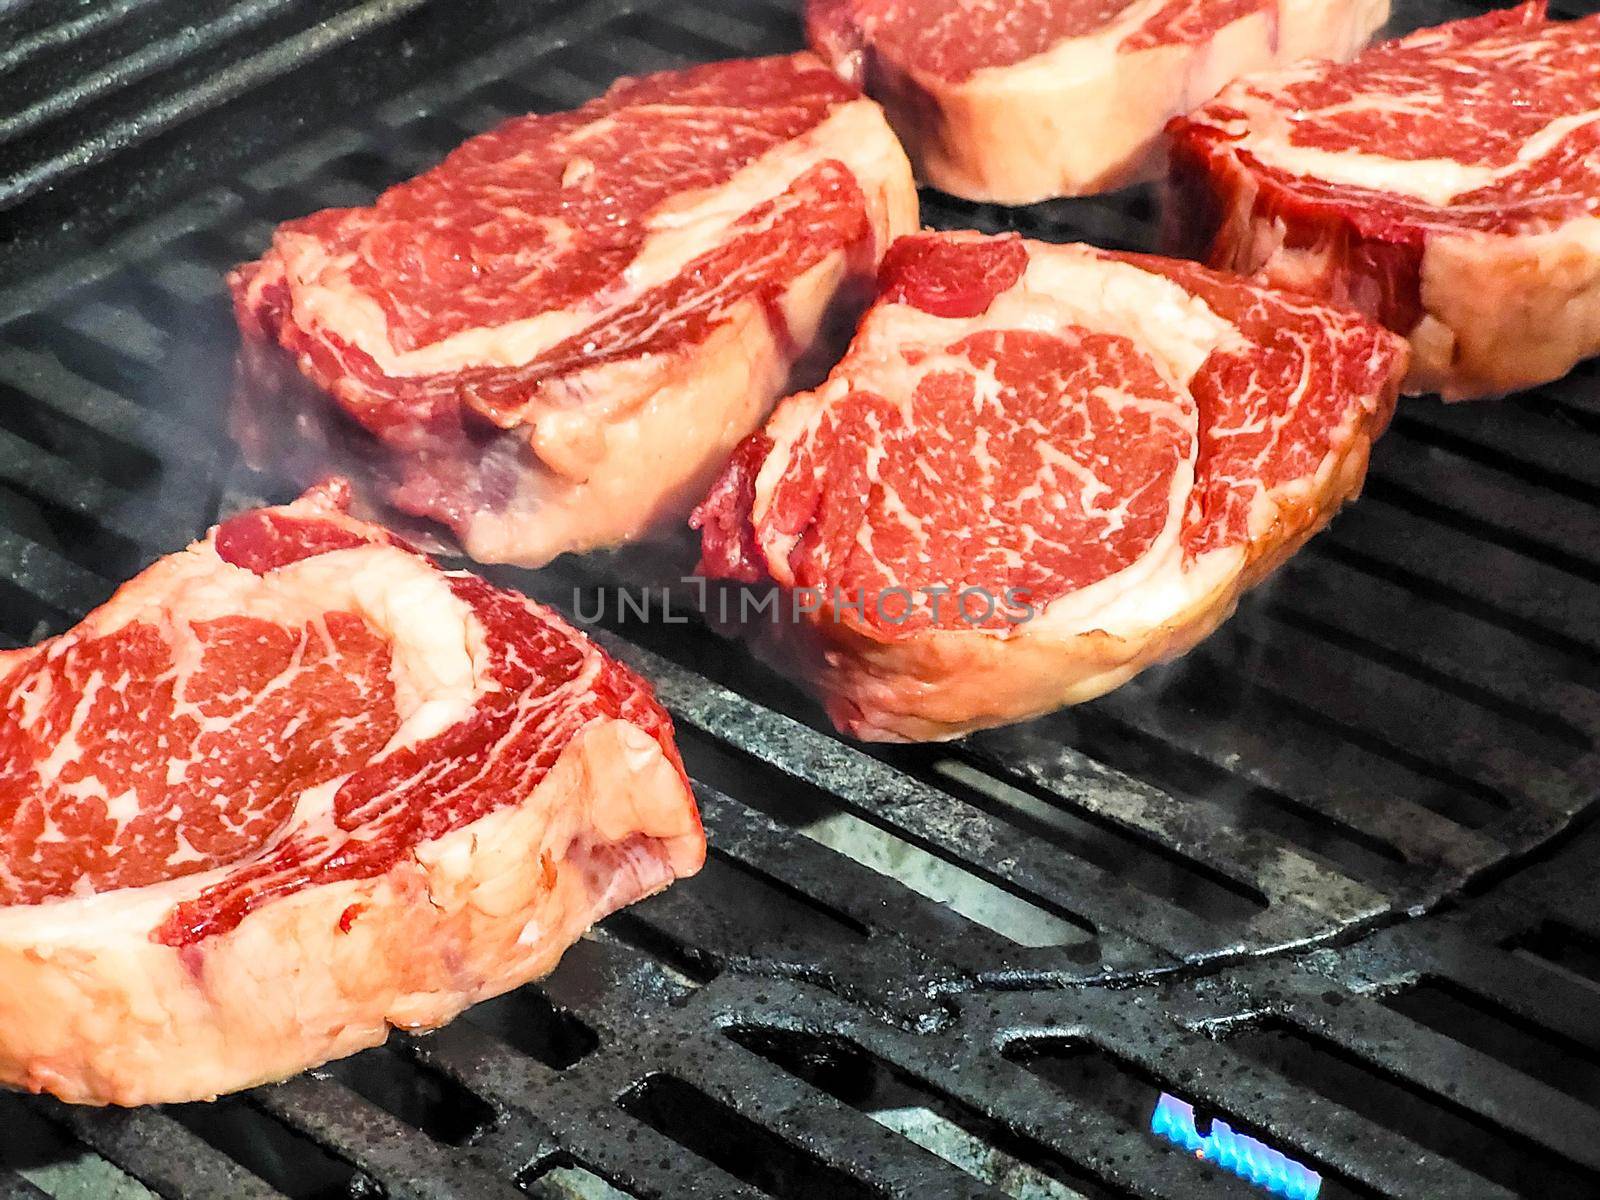 Marble beef rib eye steak is grilled by the chef